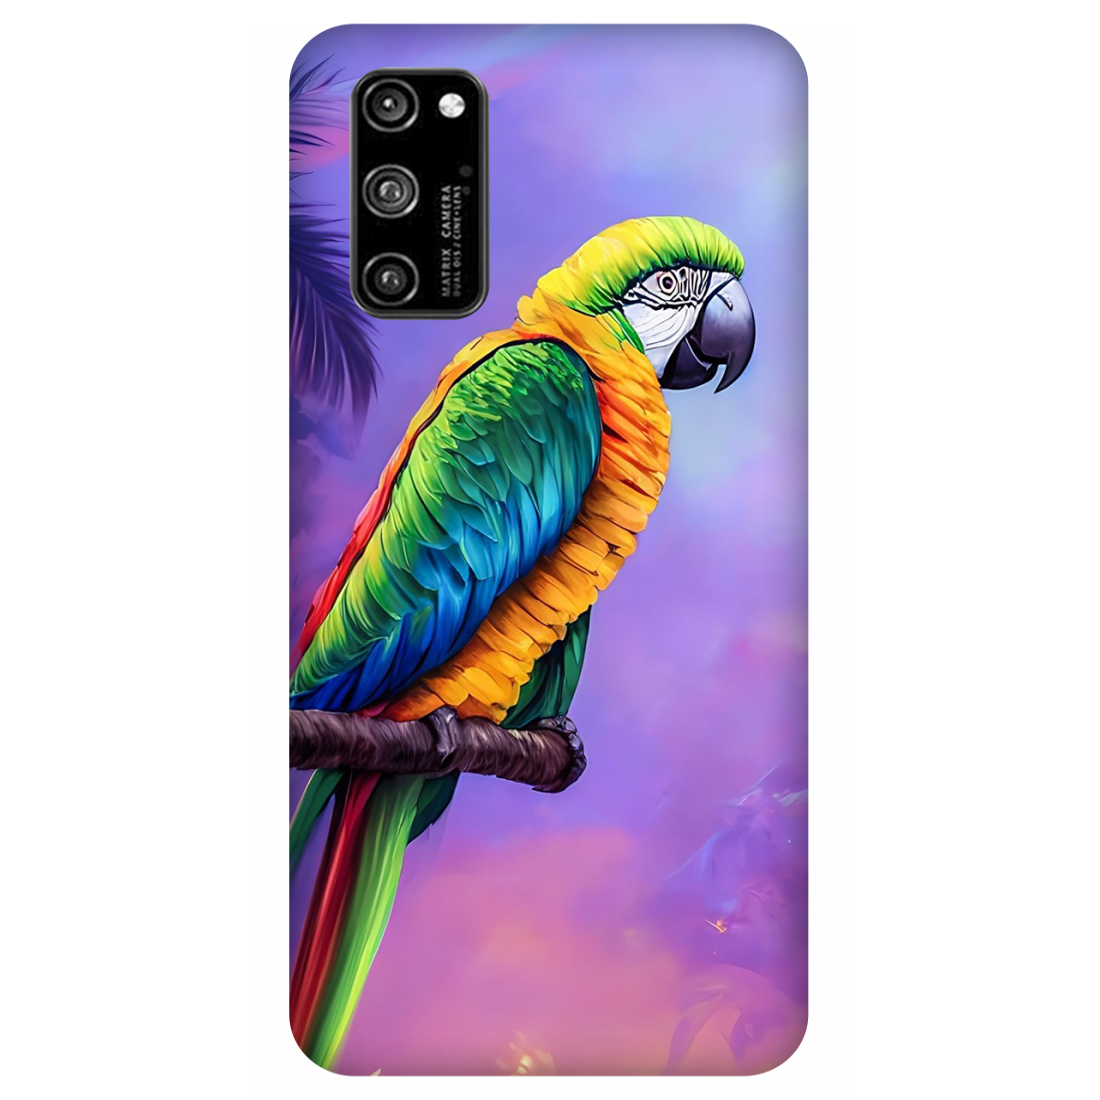 Vibrant Parrot in an Ethereal Atmosphere Case Honor V30 Pro 5G